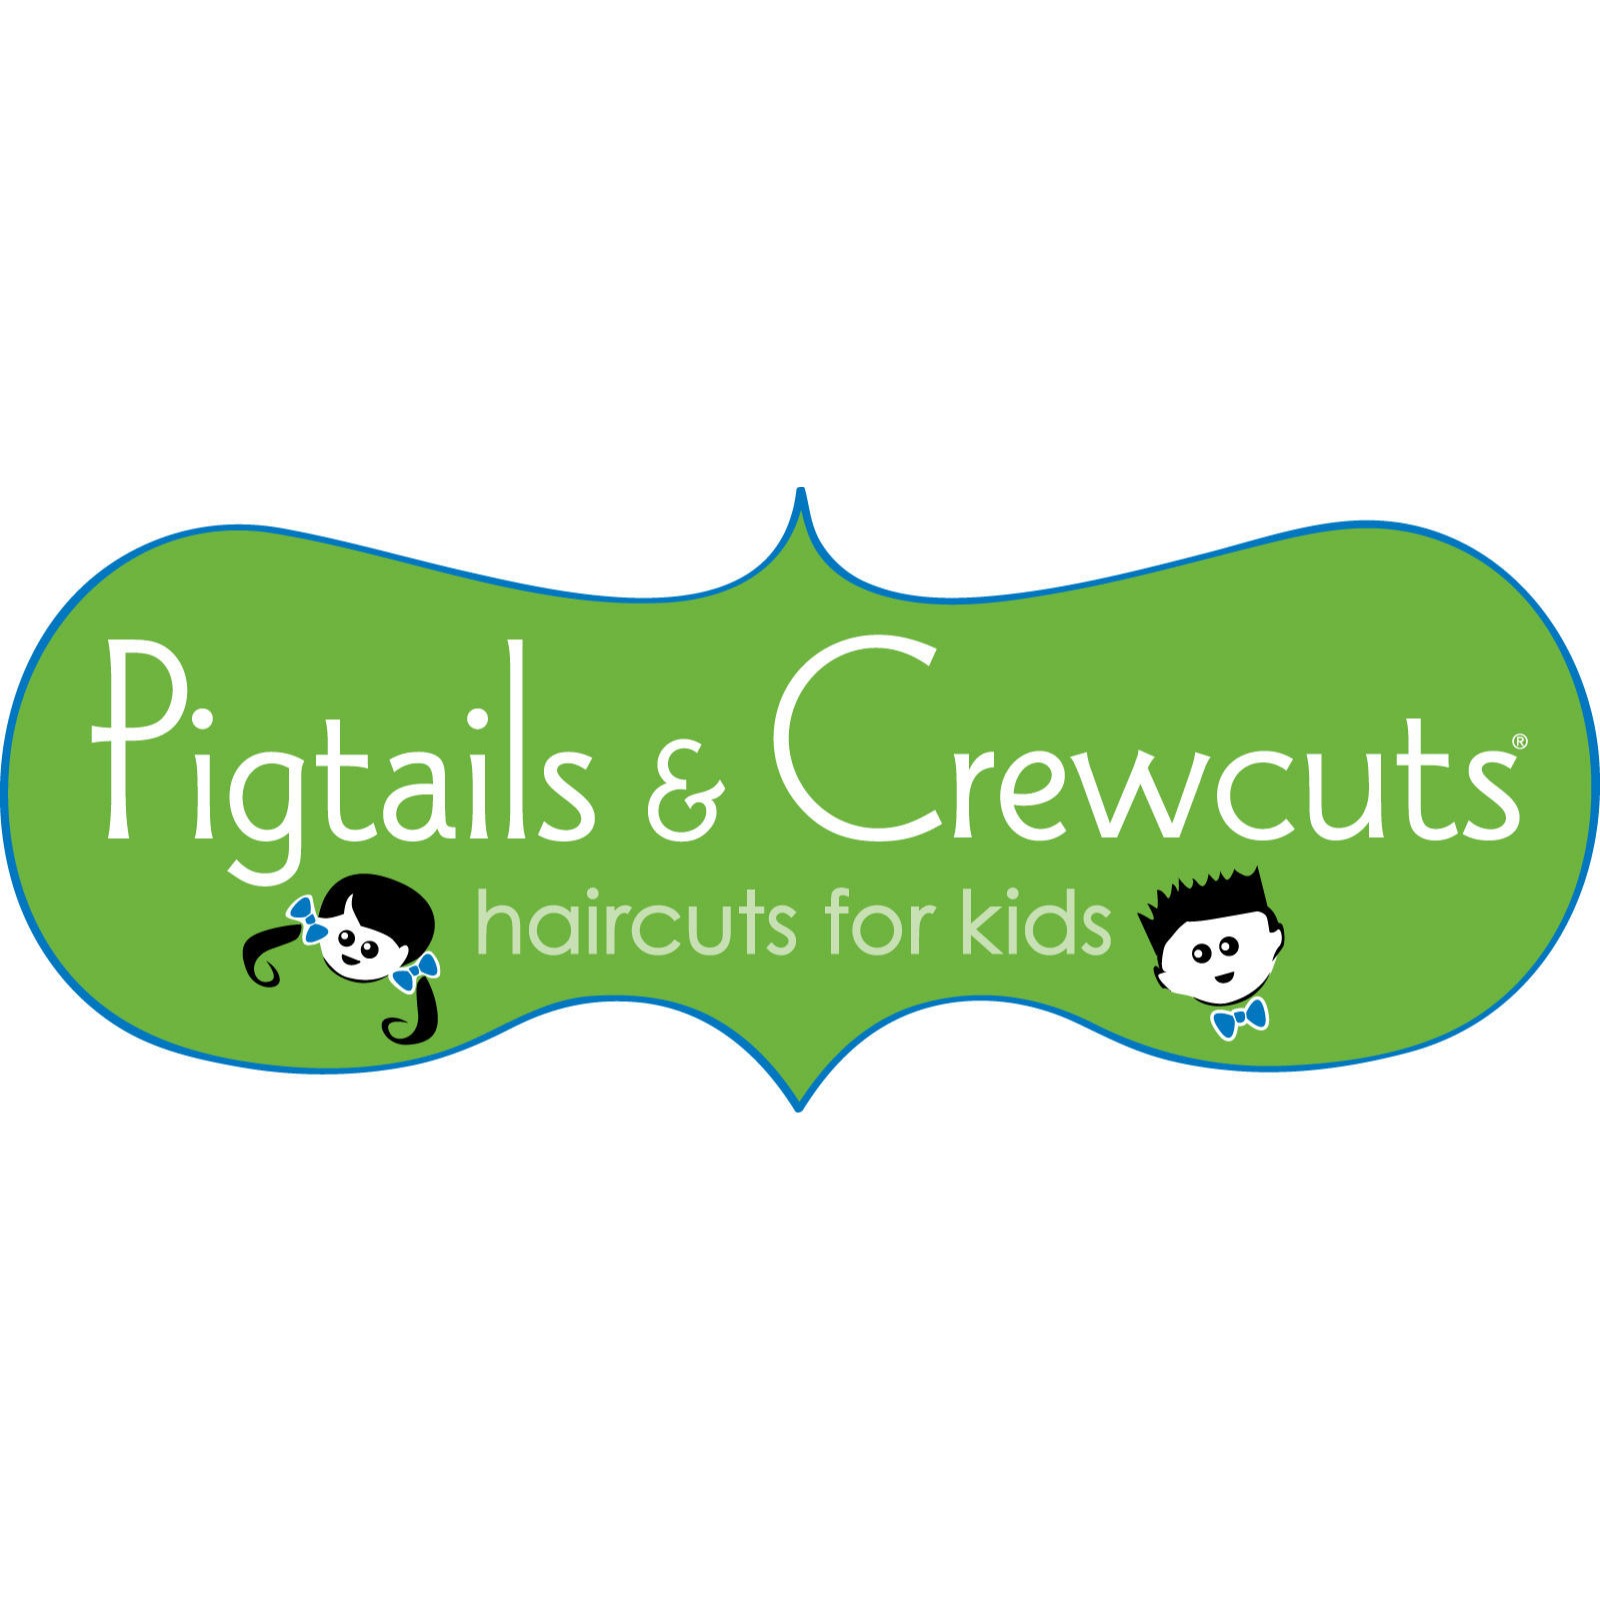 Pigtails & Crewcuts: Haircuts For Kids - Plano Logo